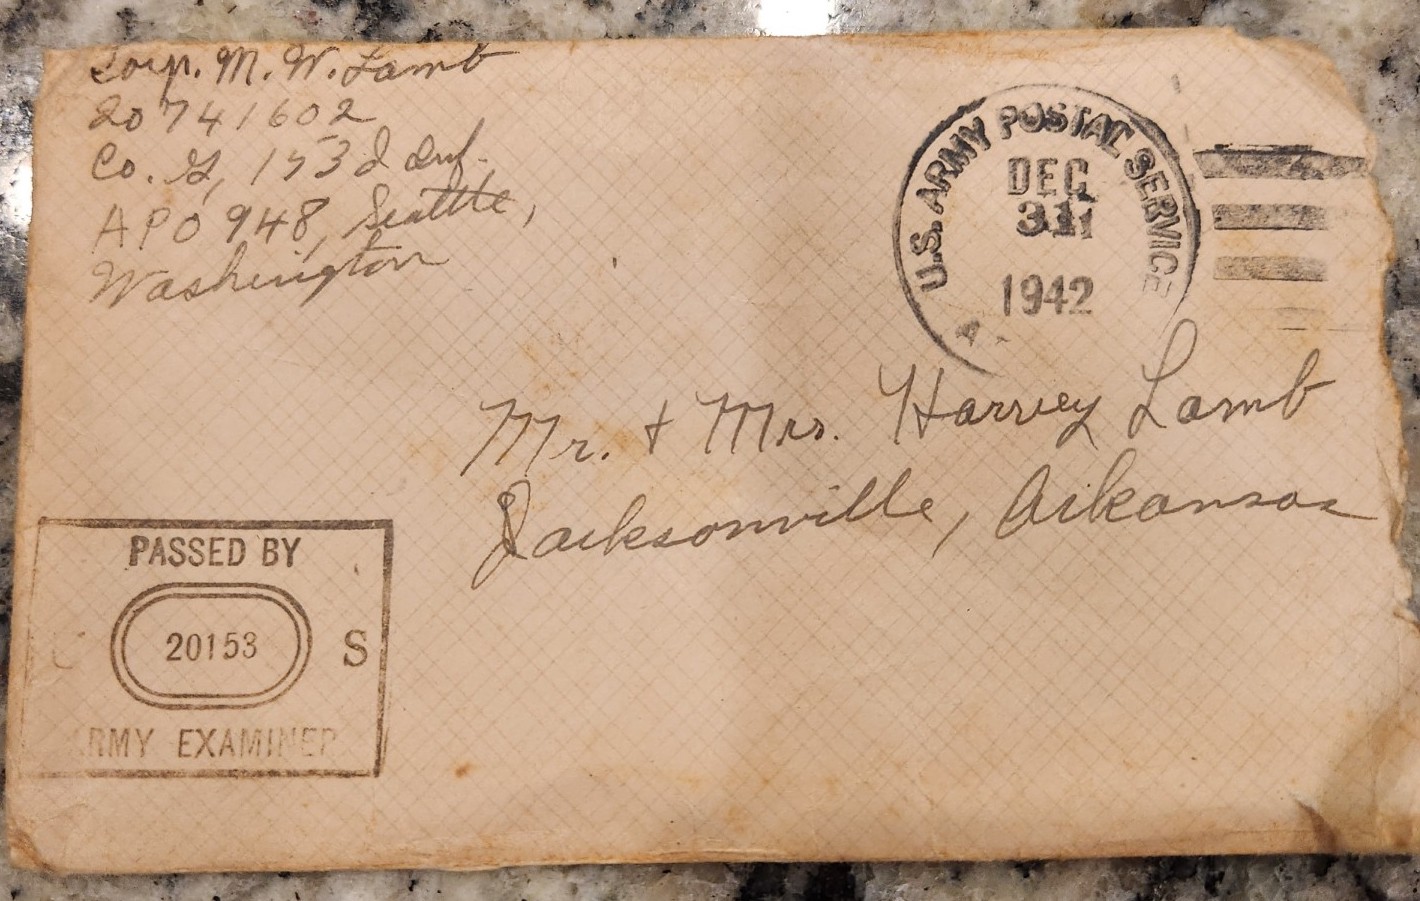 postal worker finds wwii-era letters, drives 5 hours to deliver them